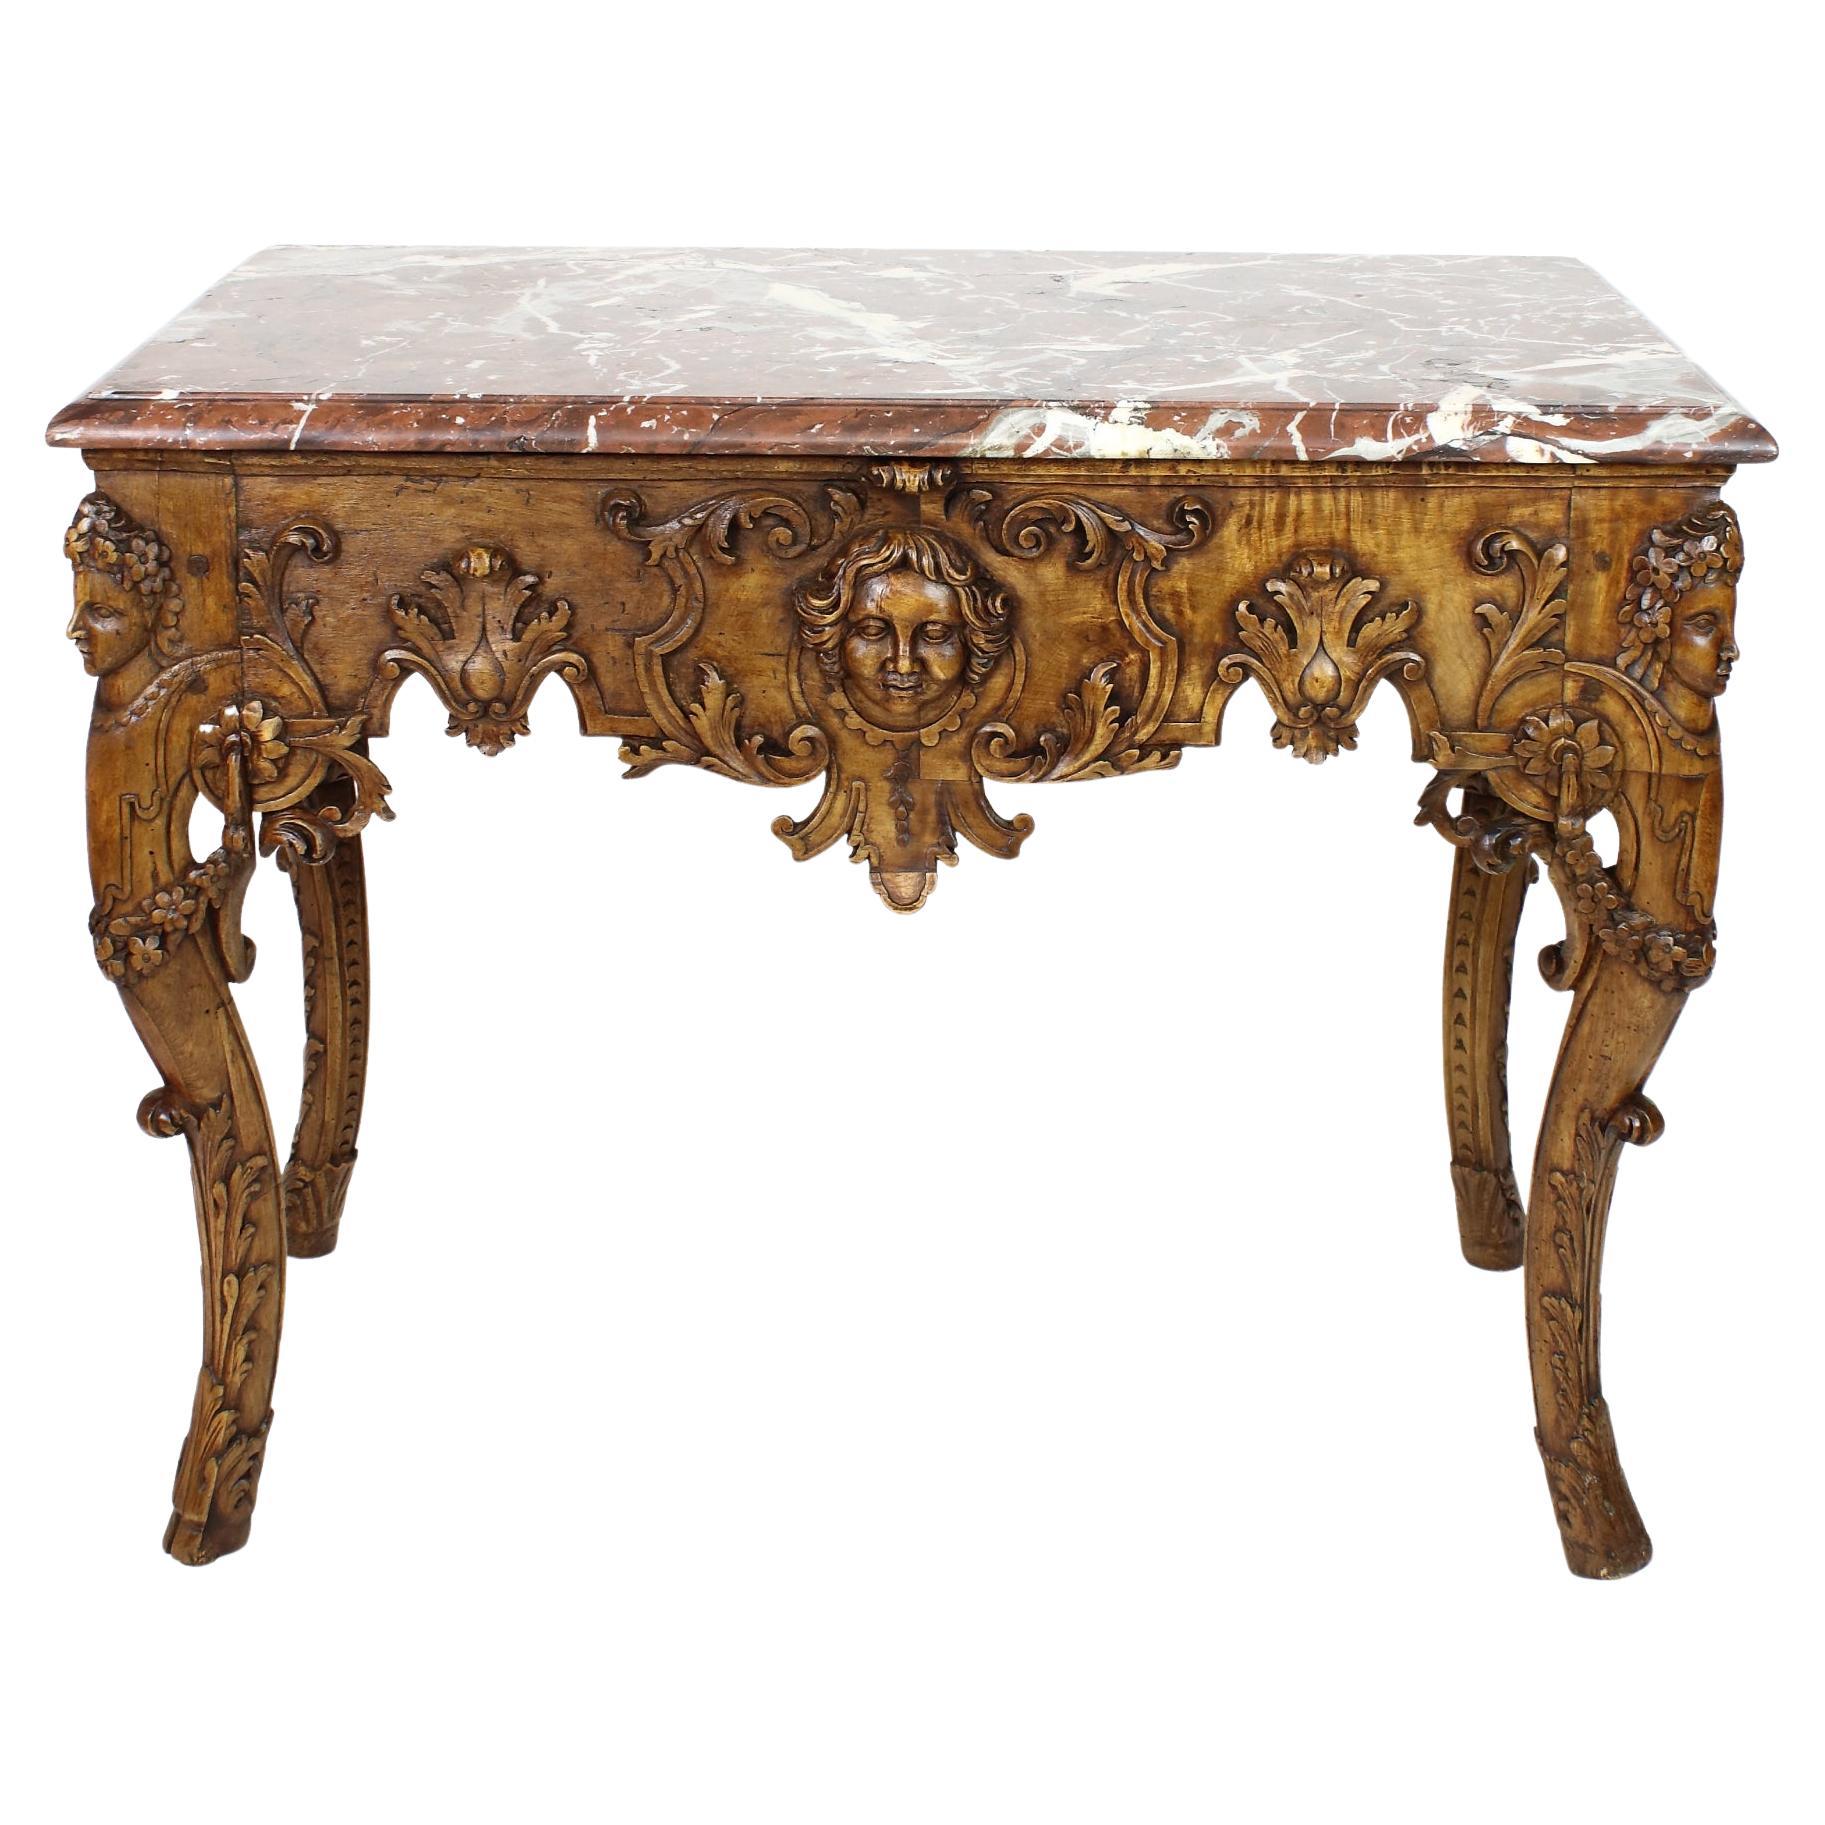 Early 18th Century Louis XIV figural Carved Wood Console Table or "Table Gibier"